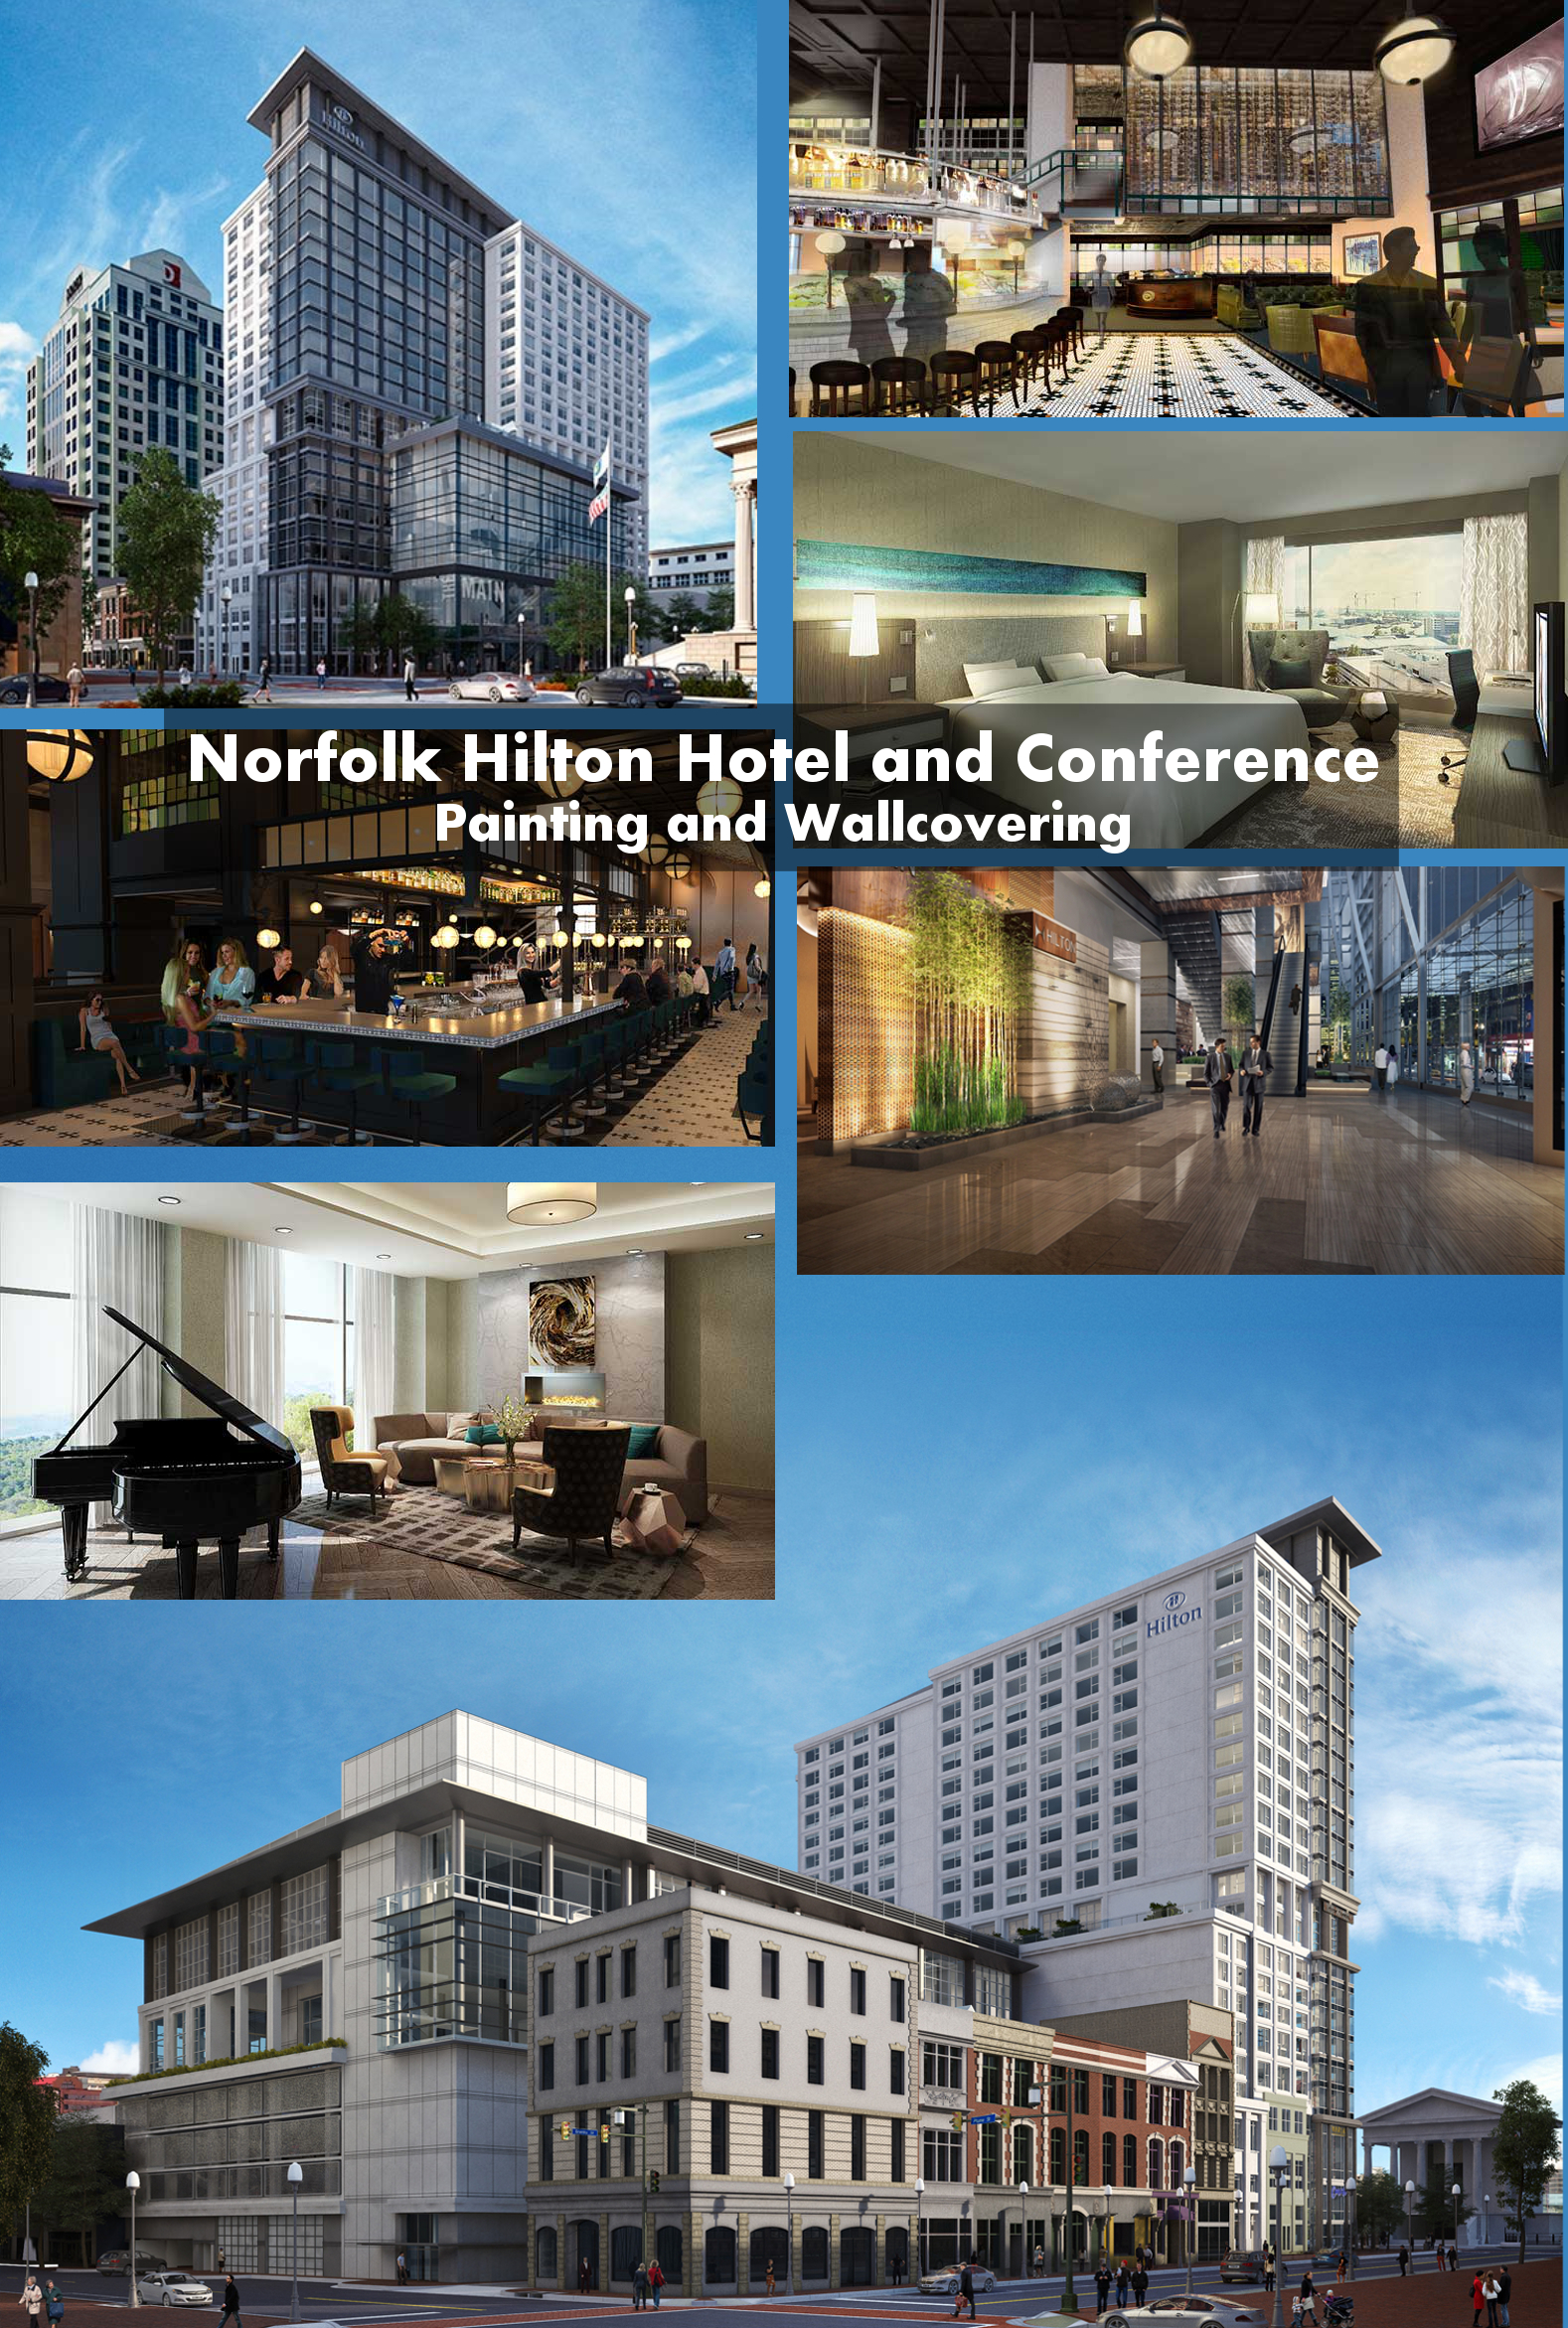 Norfolk Hilton Hotel and Conference